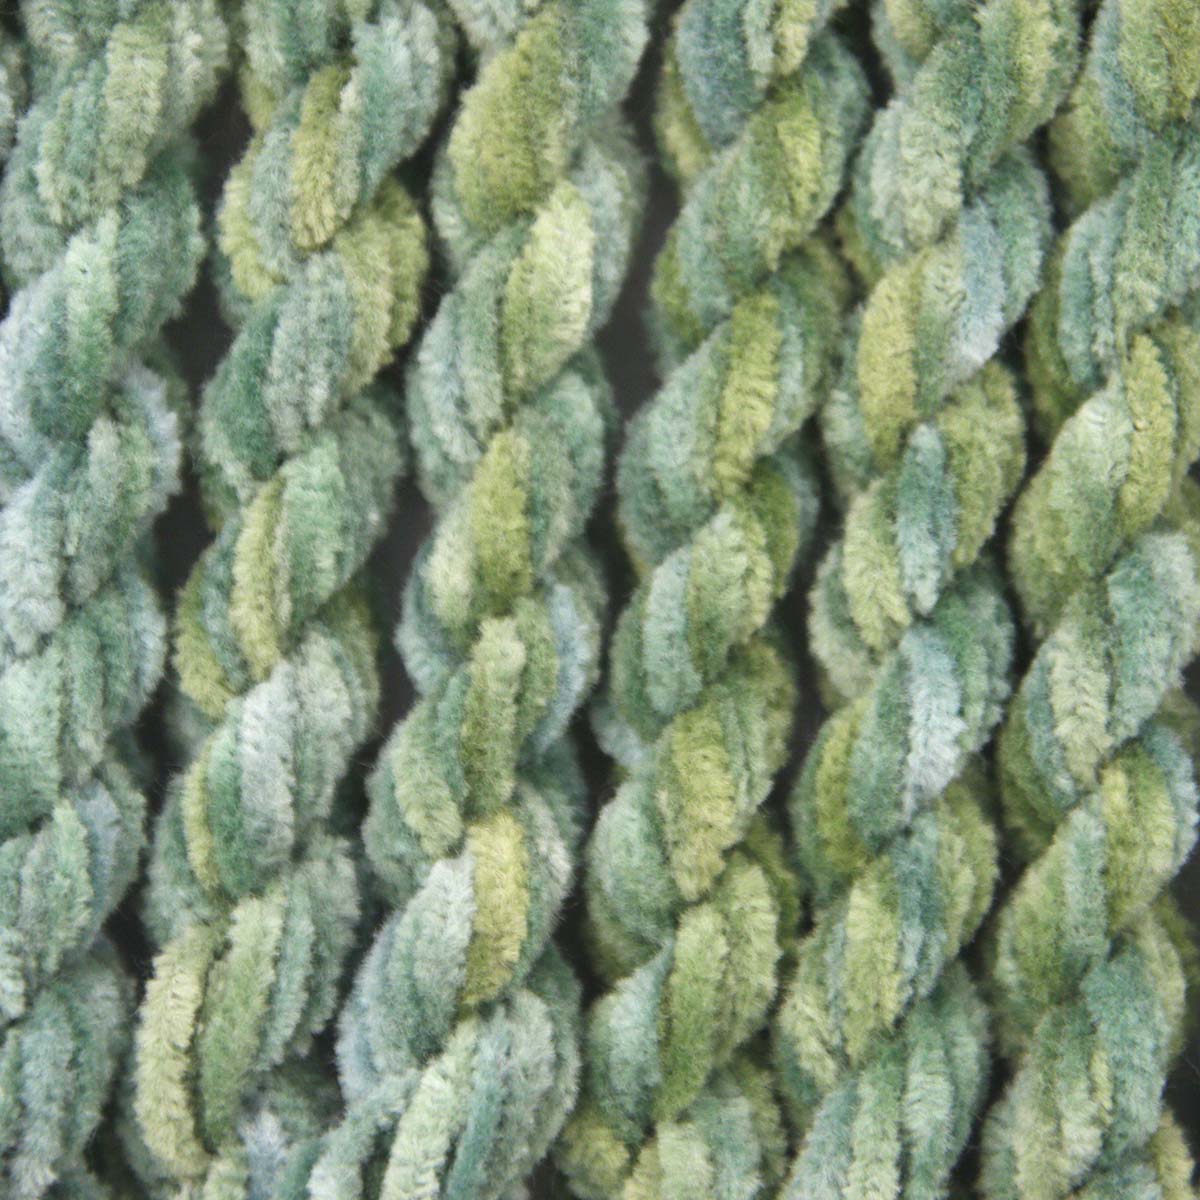 www.colourstreams.com.au Colour Streams Hand Dyed Chenille Threads Slow Stitch Embroidery Textile Arts Fibre DL 30 Eucalypt Greens